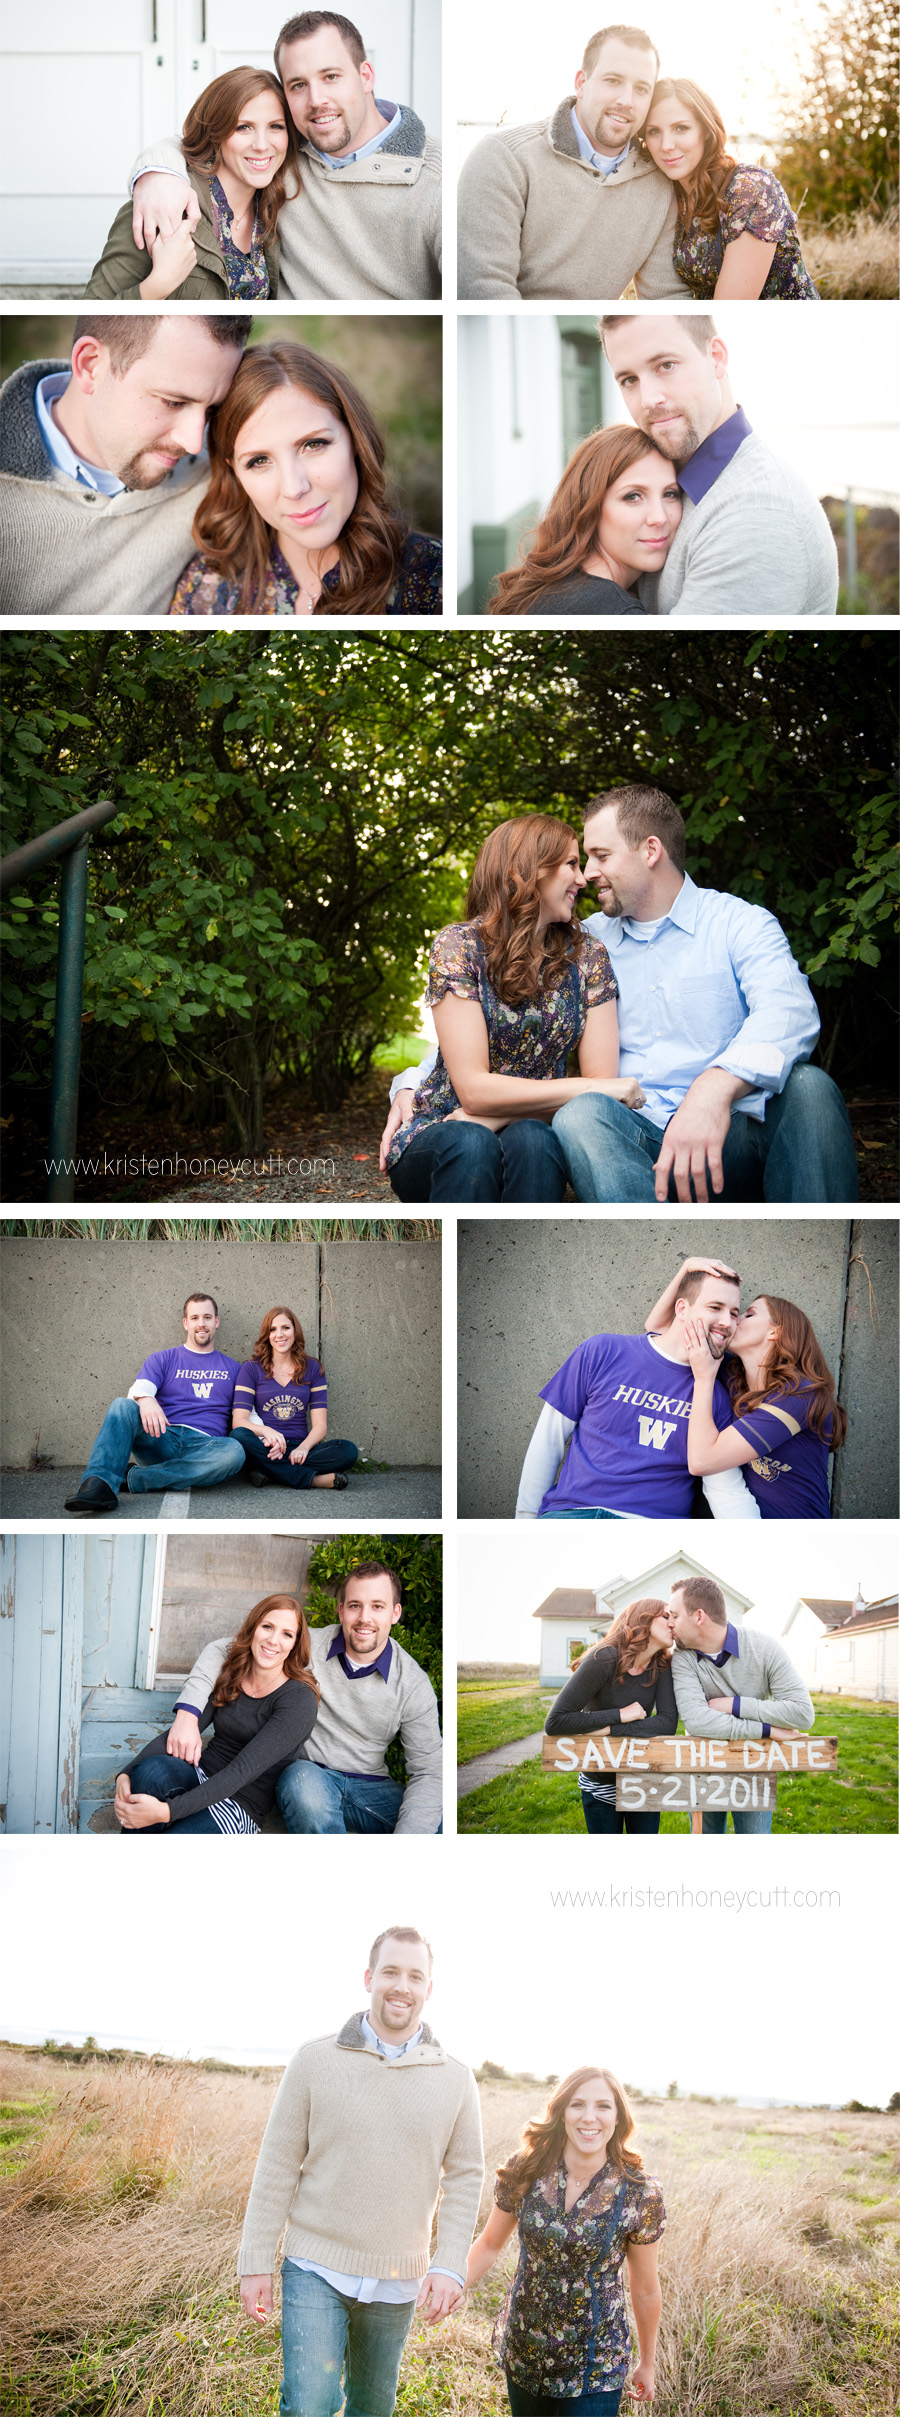 seattle bride and groom do their engagement portraits at discovery park